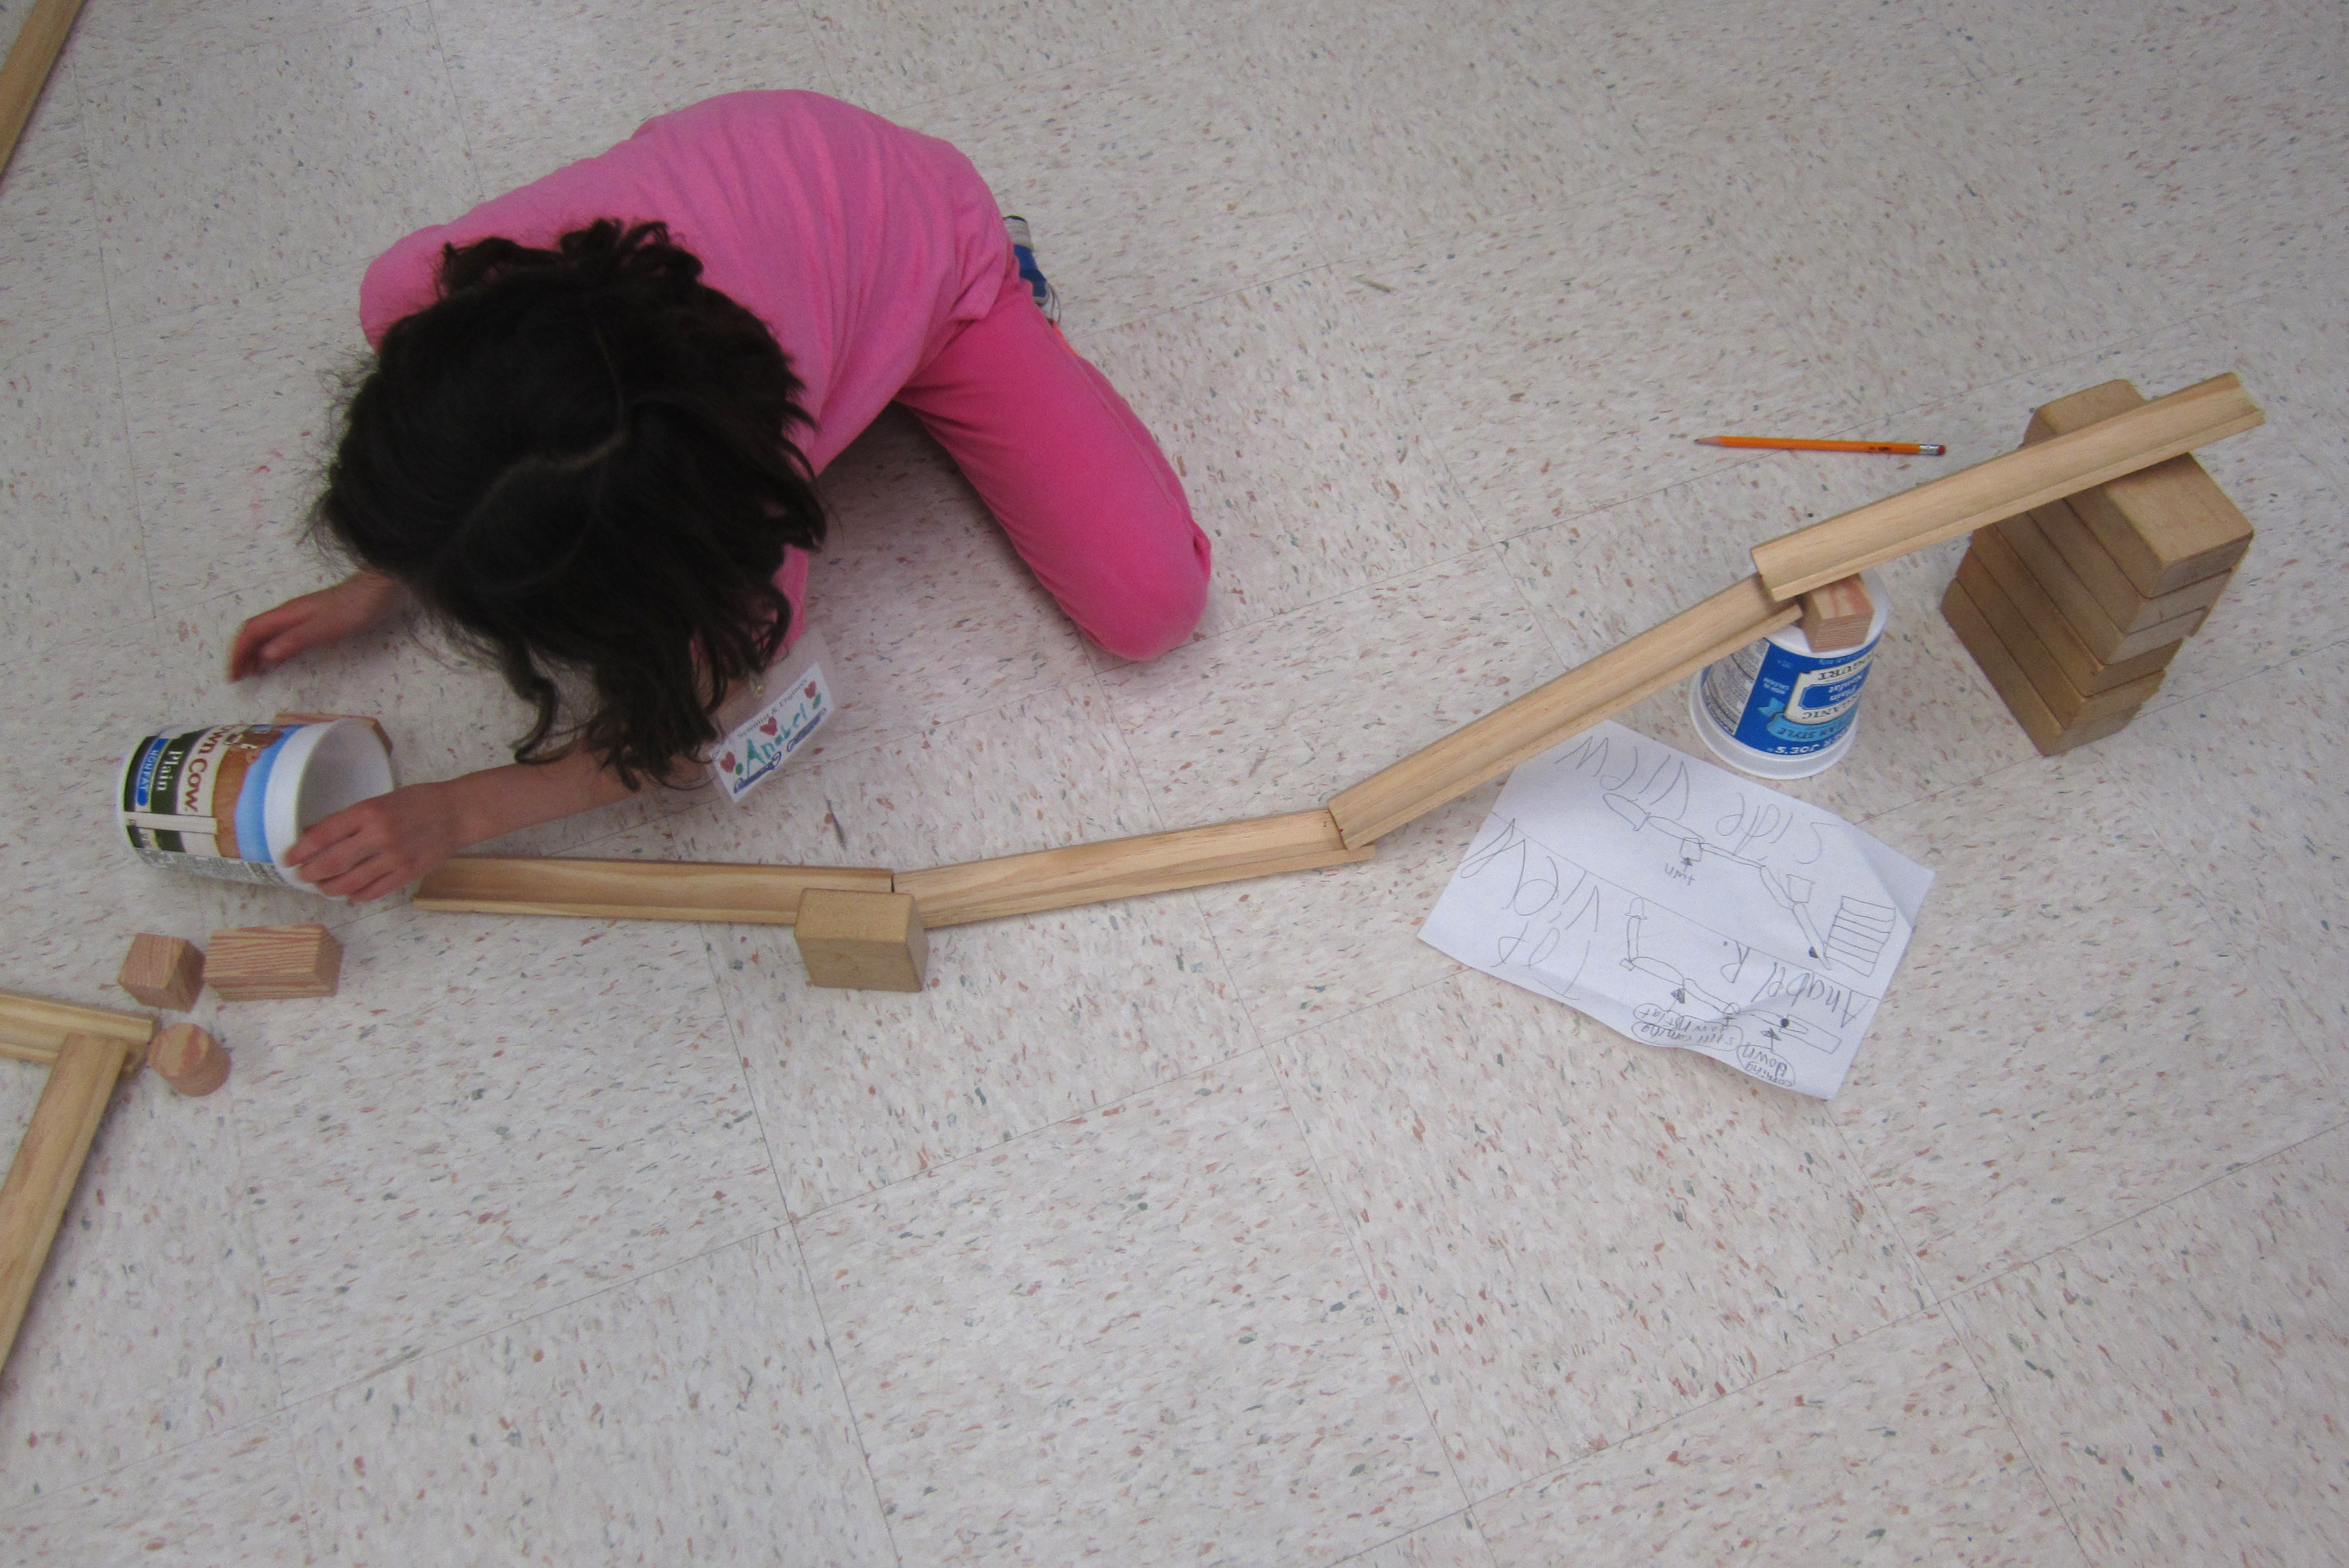 Child builds a ramp structure based on her drawing.